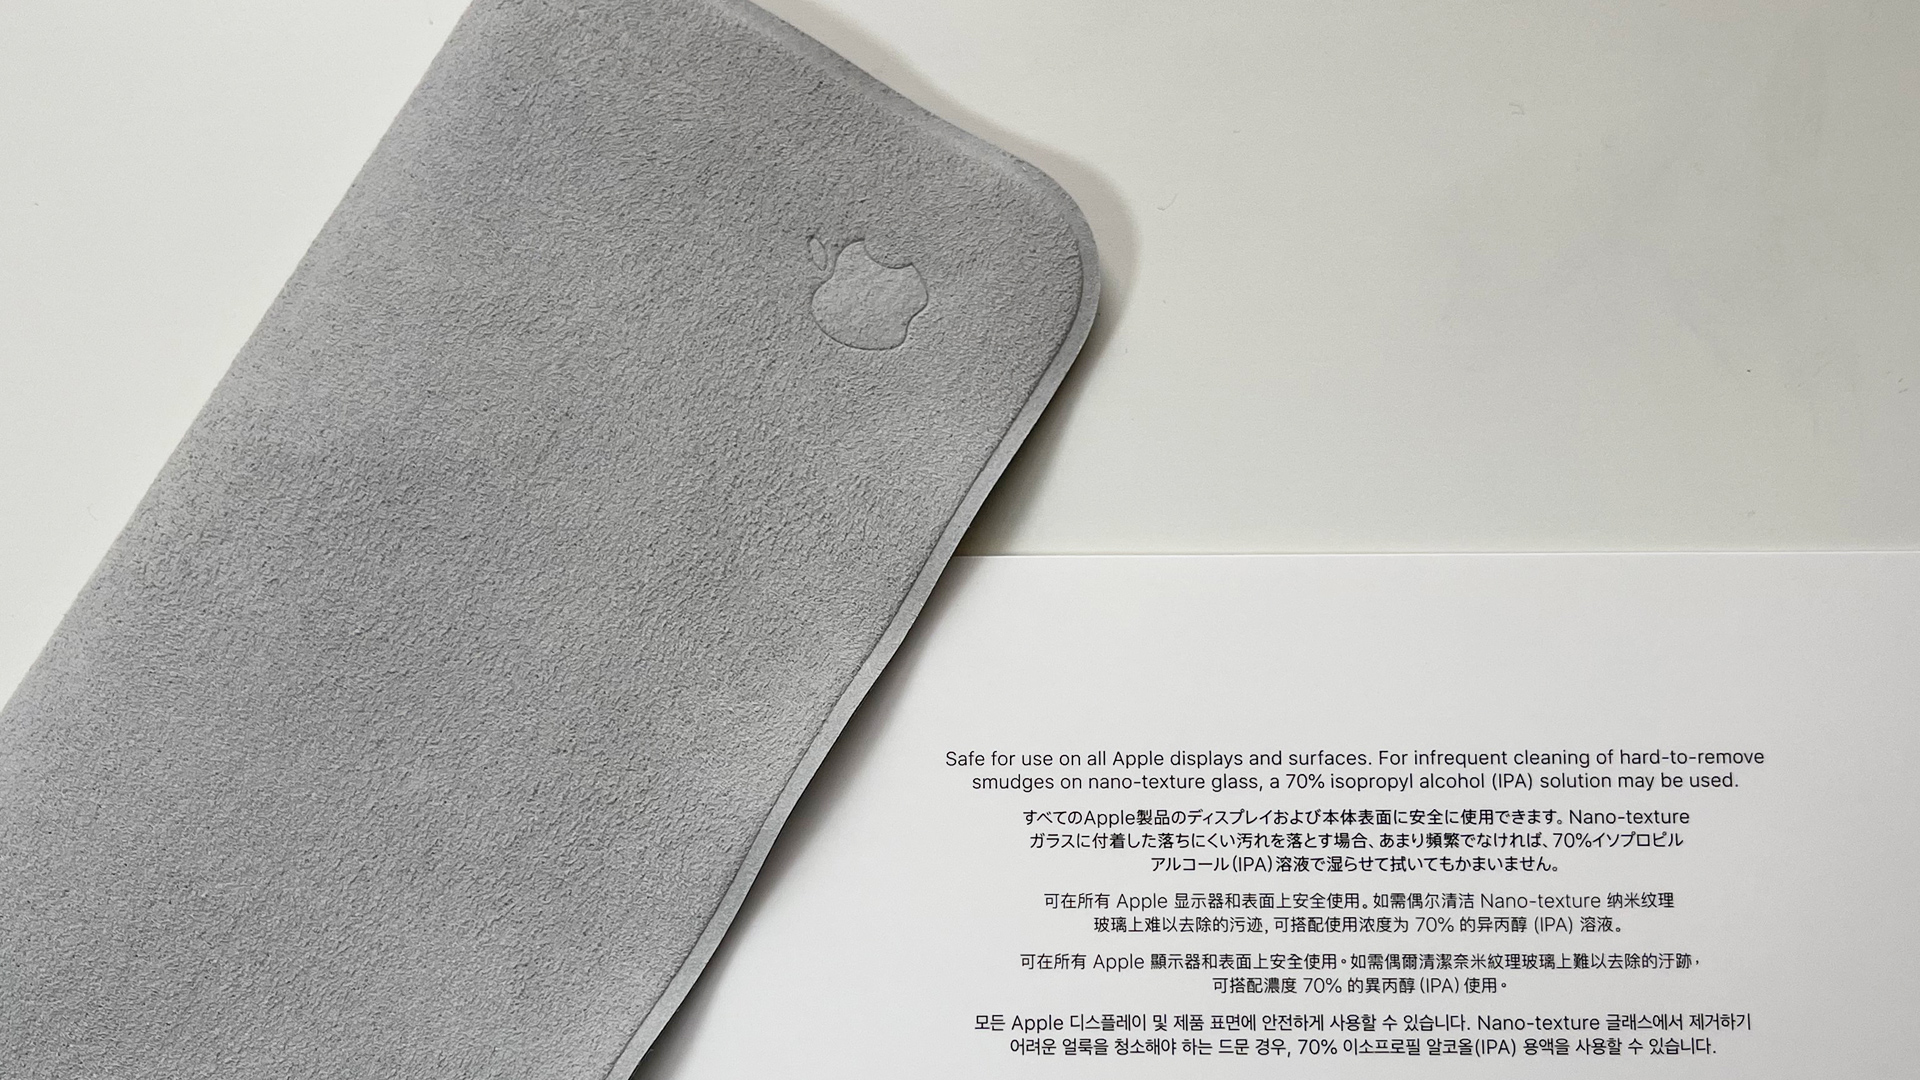 First photos of Apple's new Polishing Cloth surface on the web